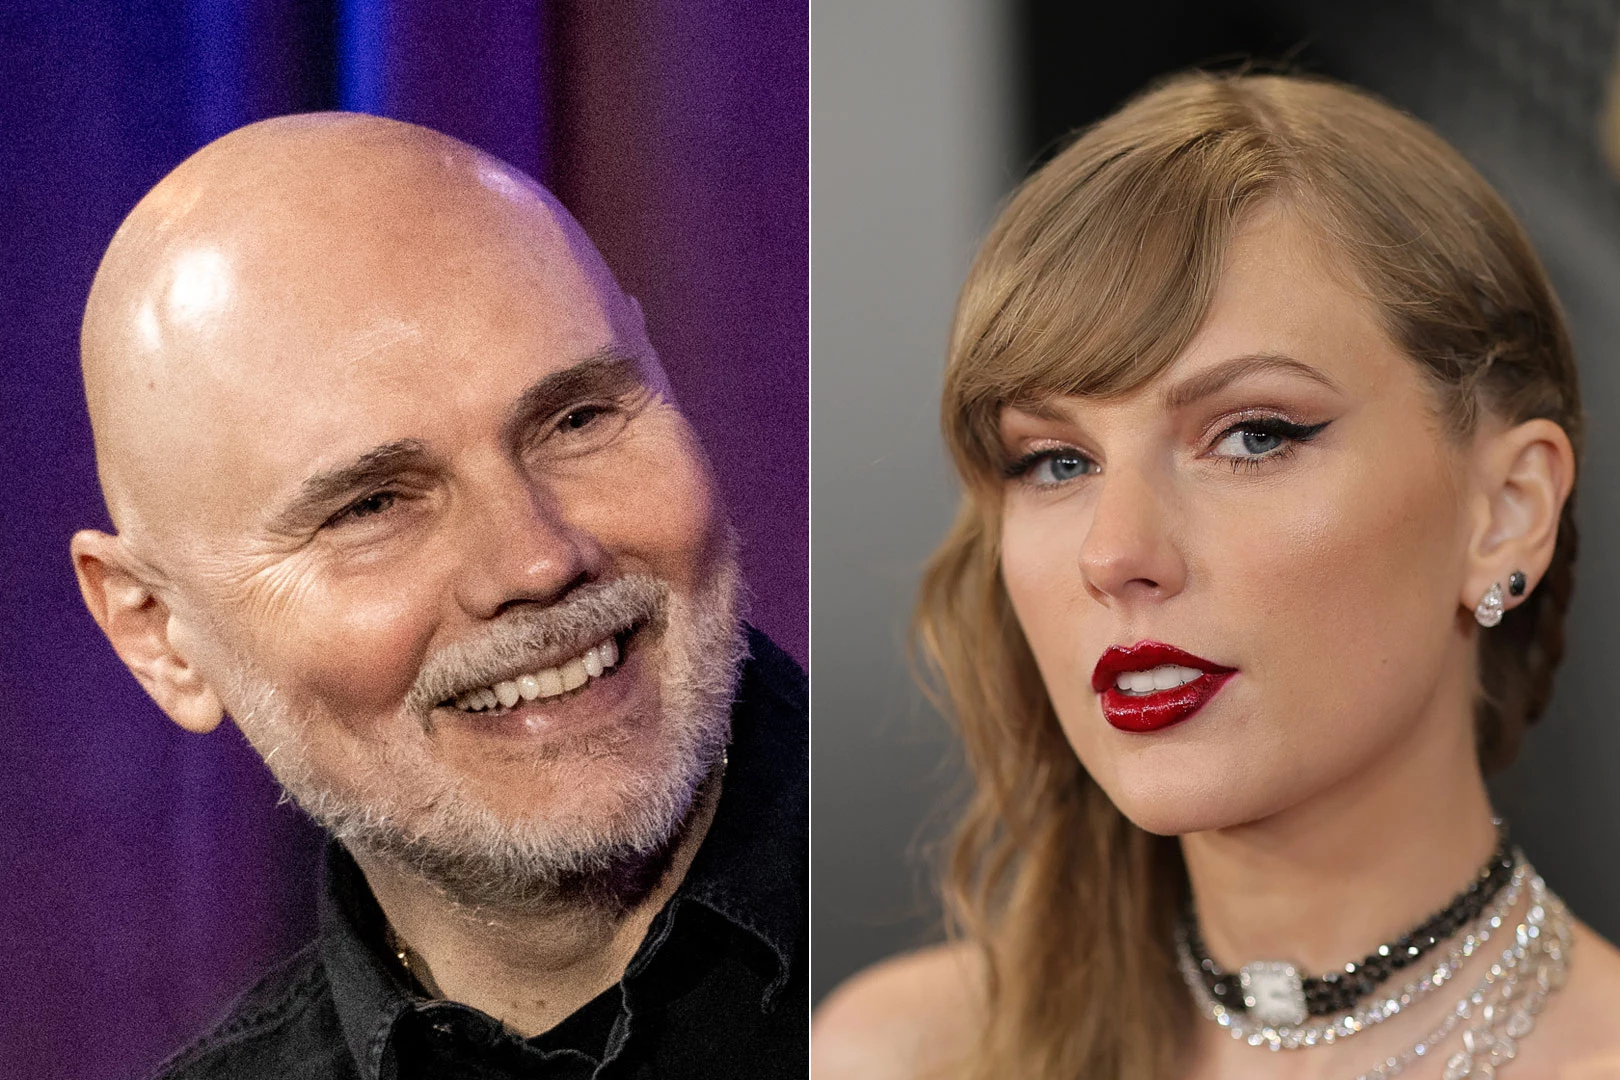 Billy Corgan Defends Taylor Swift Over Mutual Fan Complaint